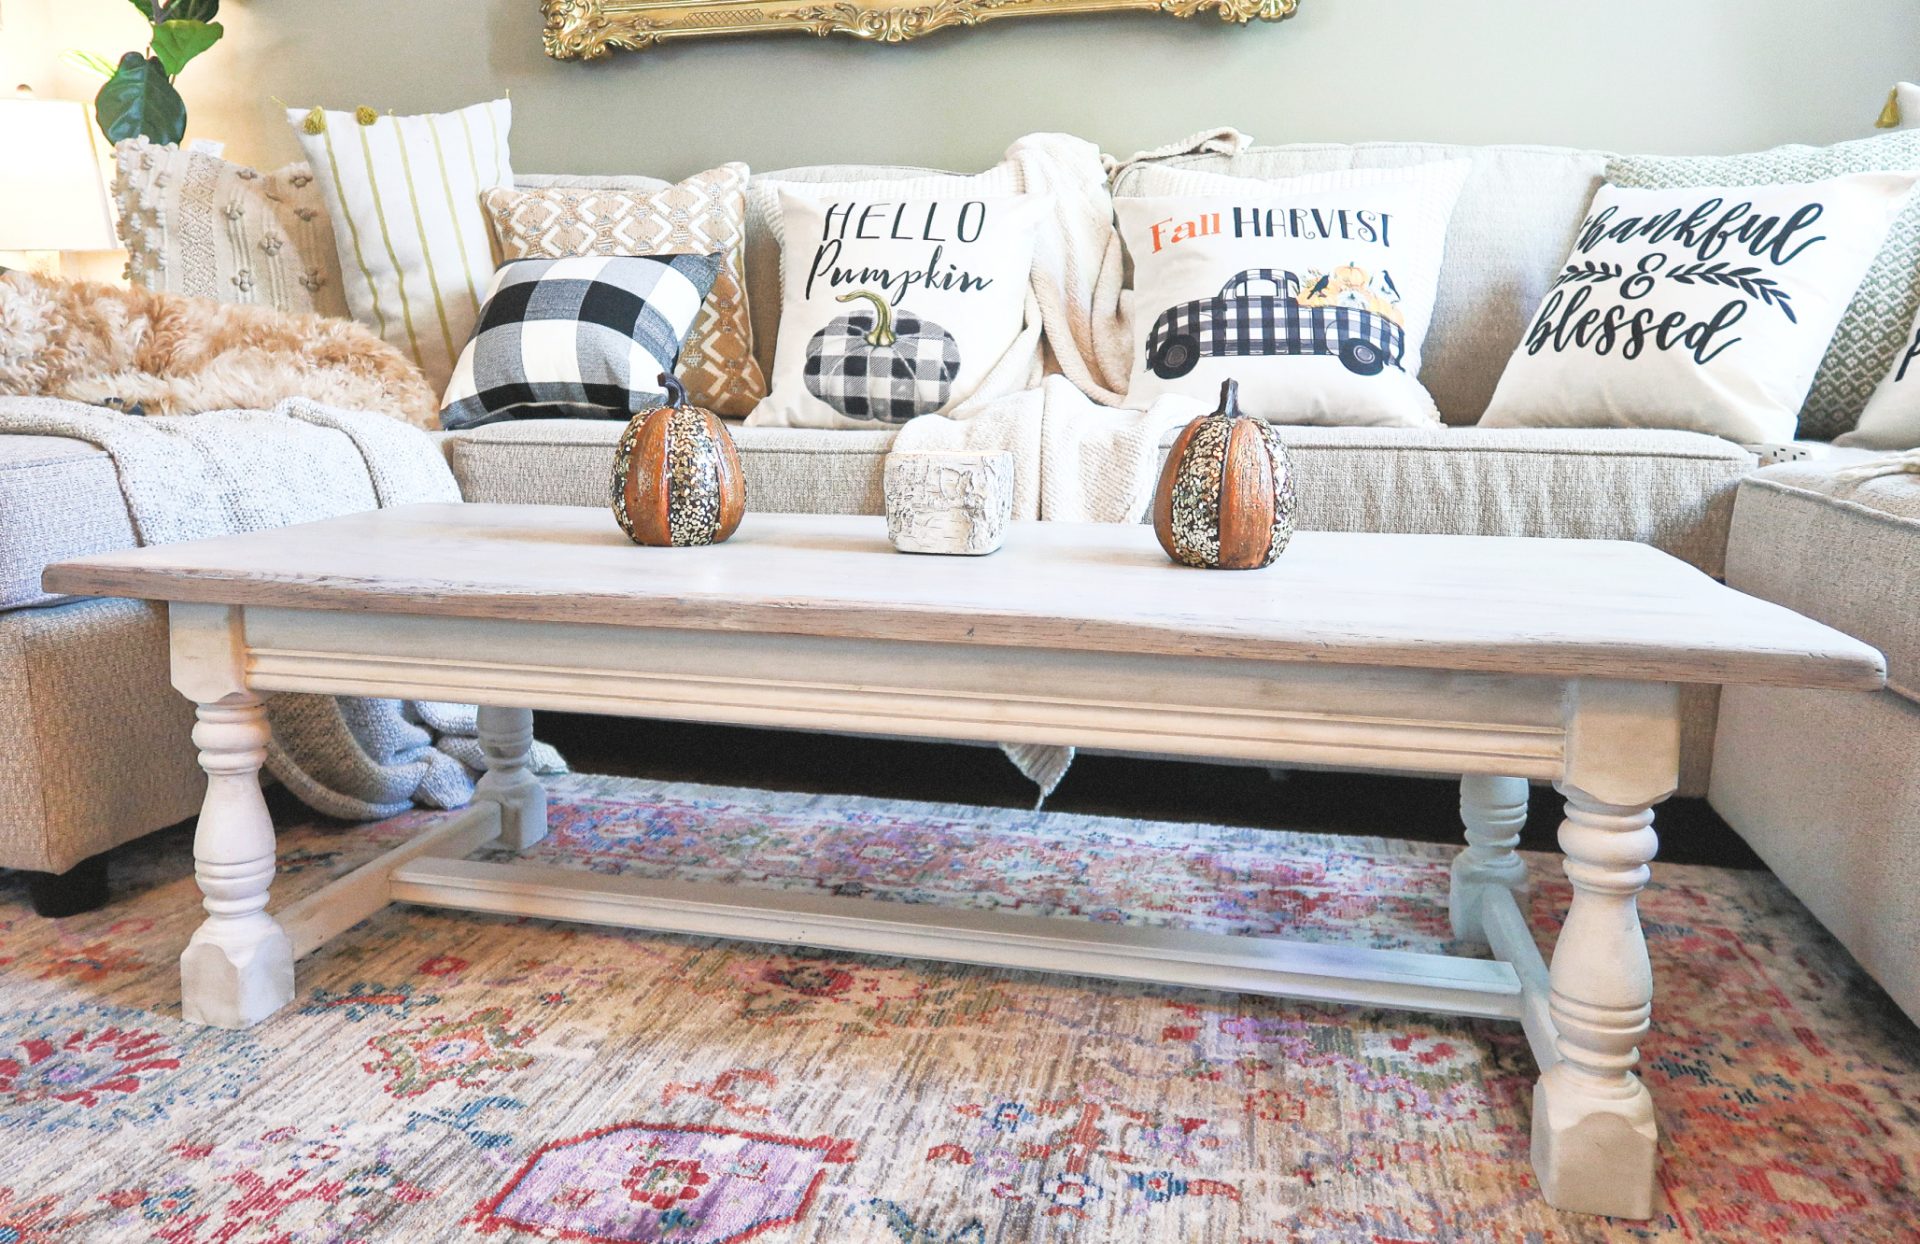 DIY, distressed, white wash furniture , farm house look, how to farm house, distress coffee table, diy farmhouse, pumpkin, fall, coffee table , refurbish project, paint white, chalk paint, home decor, wax furniture, sanding, how to diy, how to refurbish, before and after coffee table